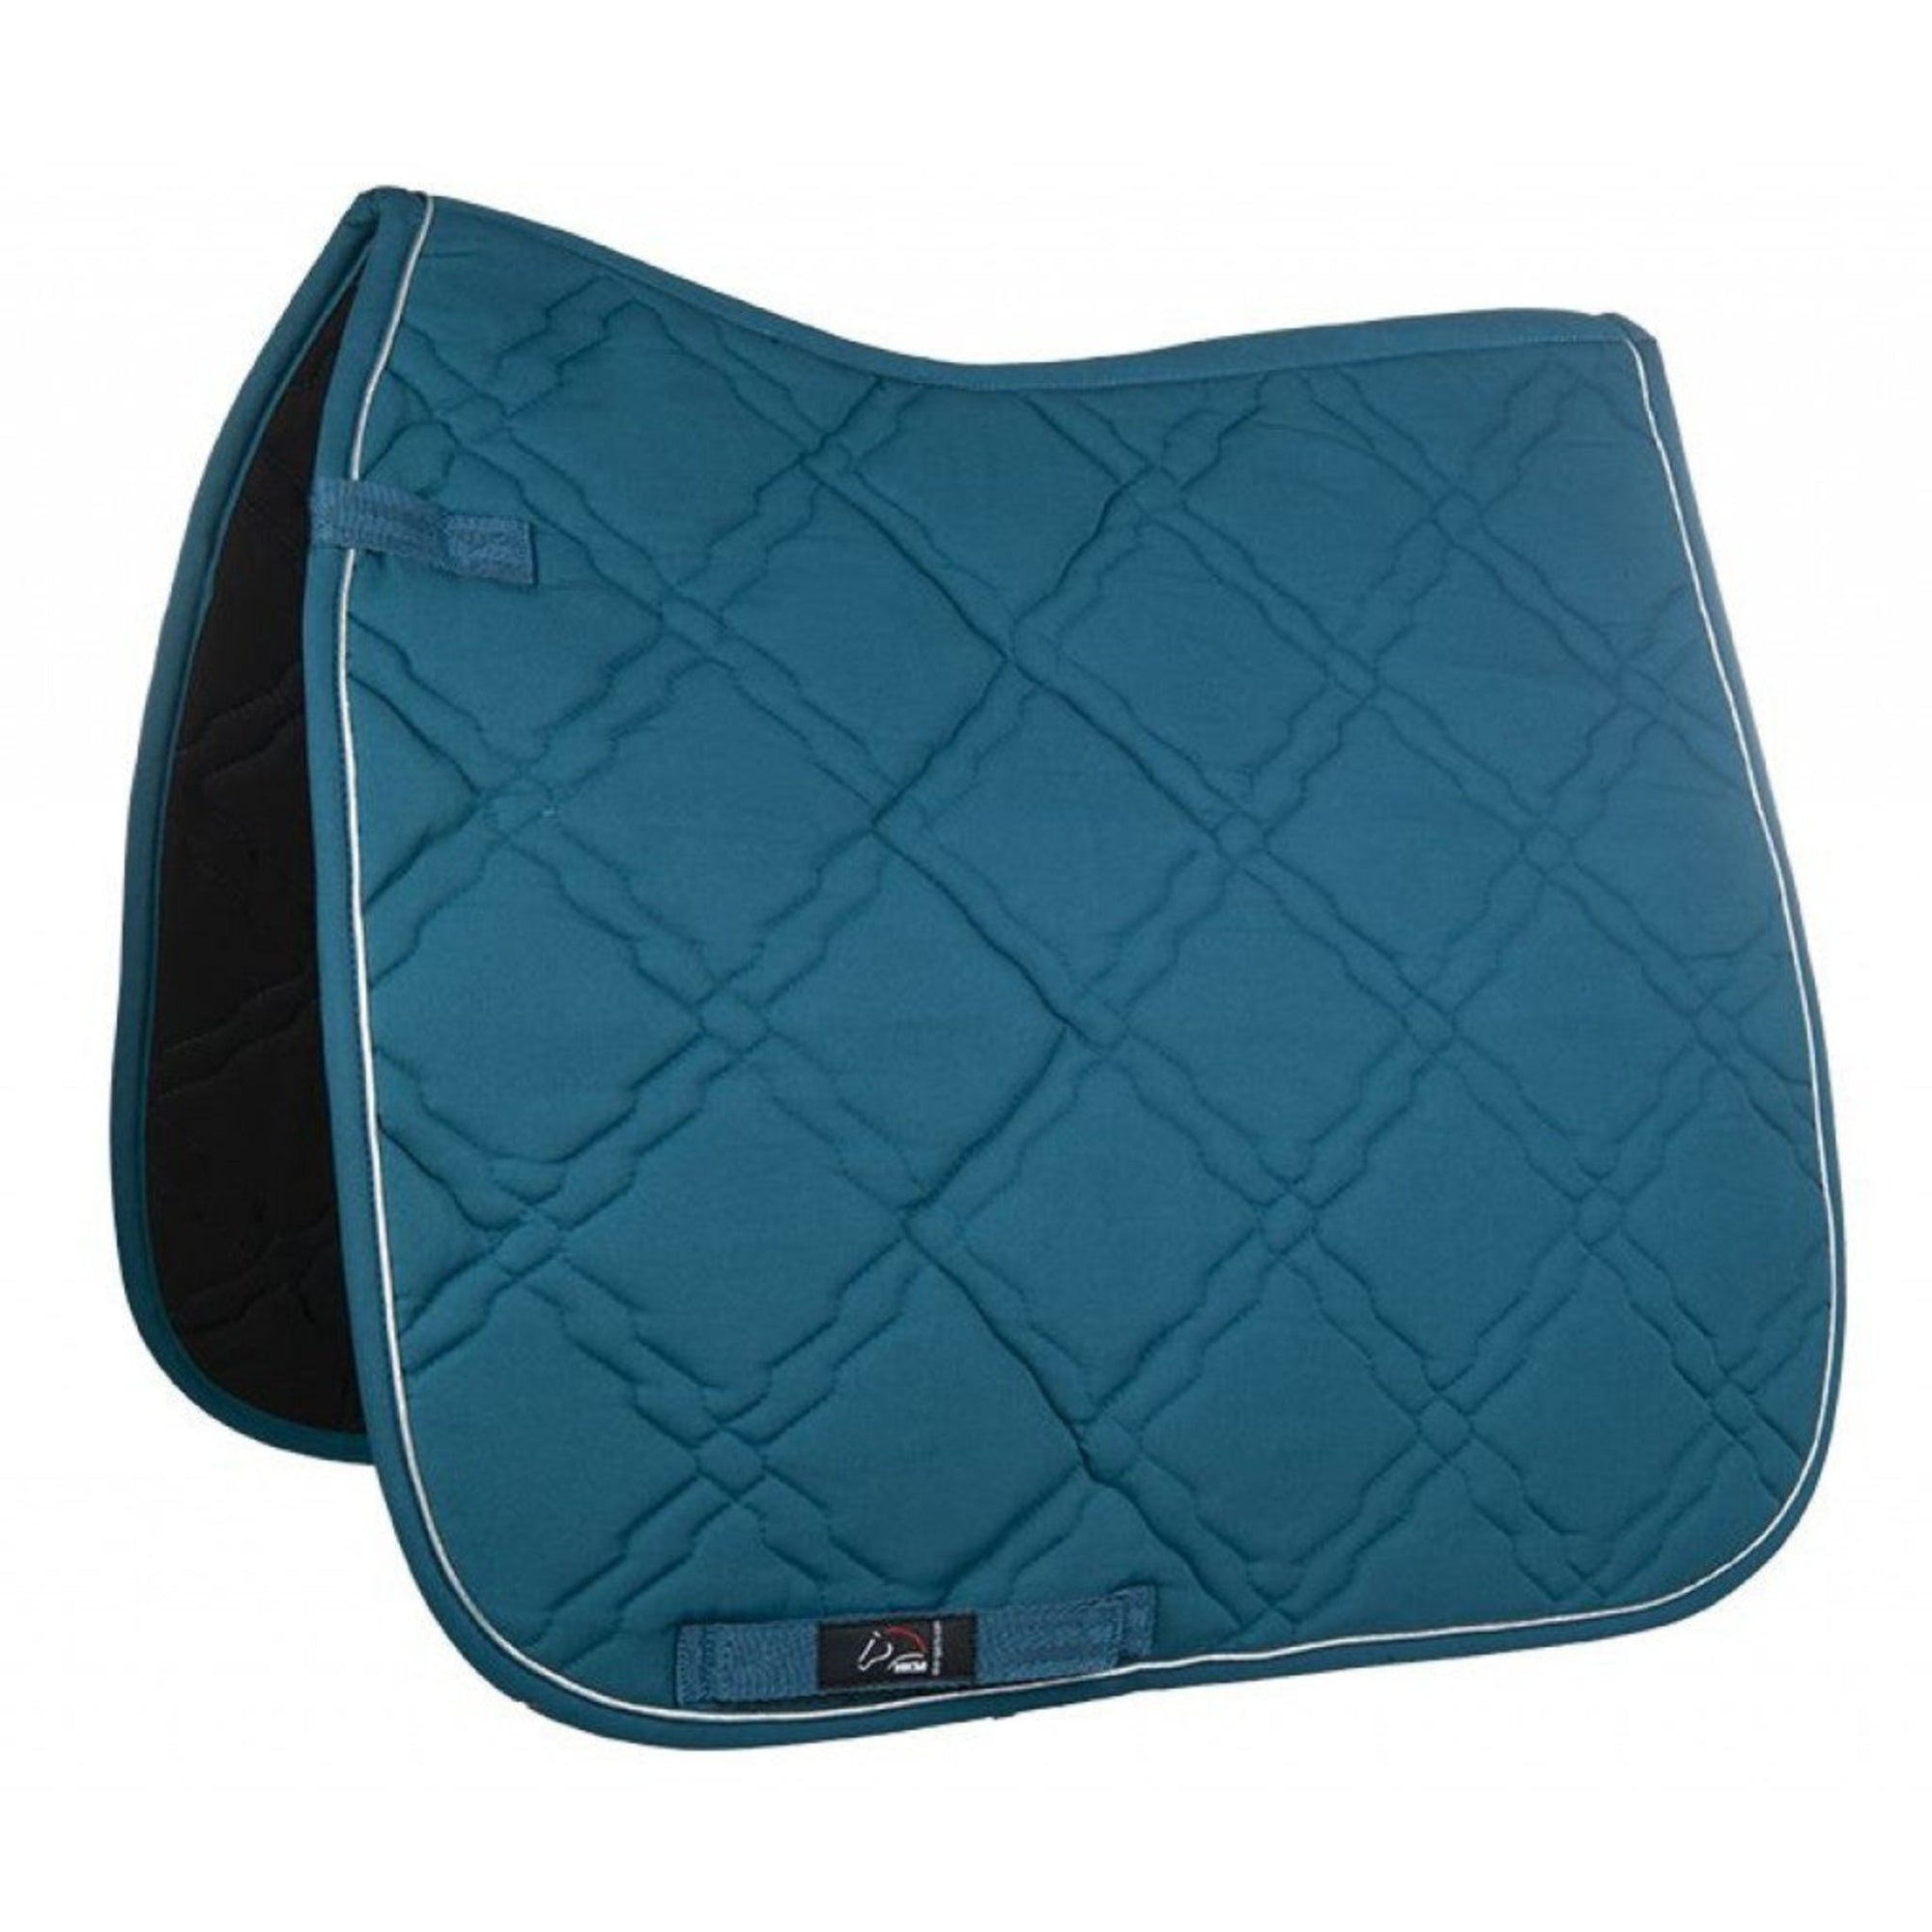 Green saddle pad with white trim and velcro tab at top.